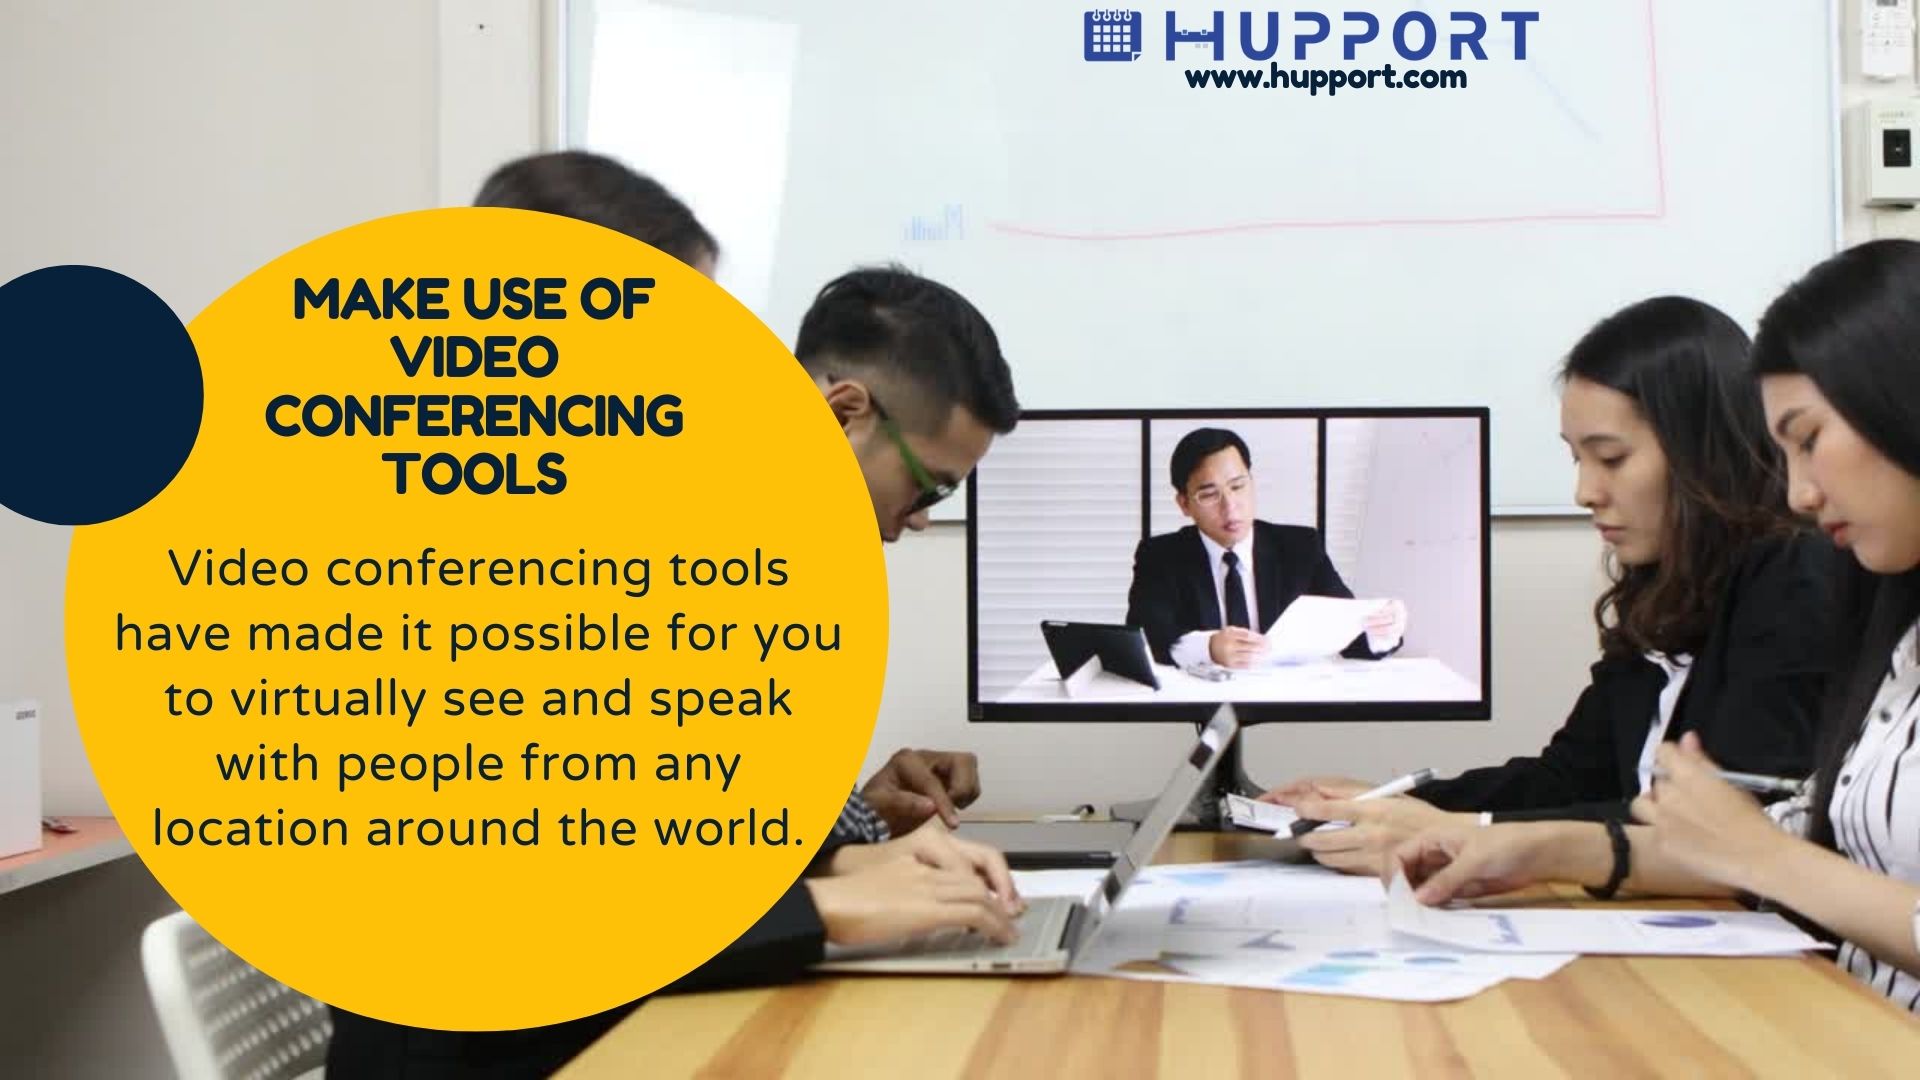 Make use of video conferencing tools